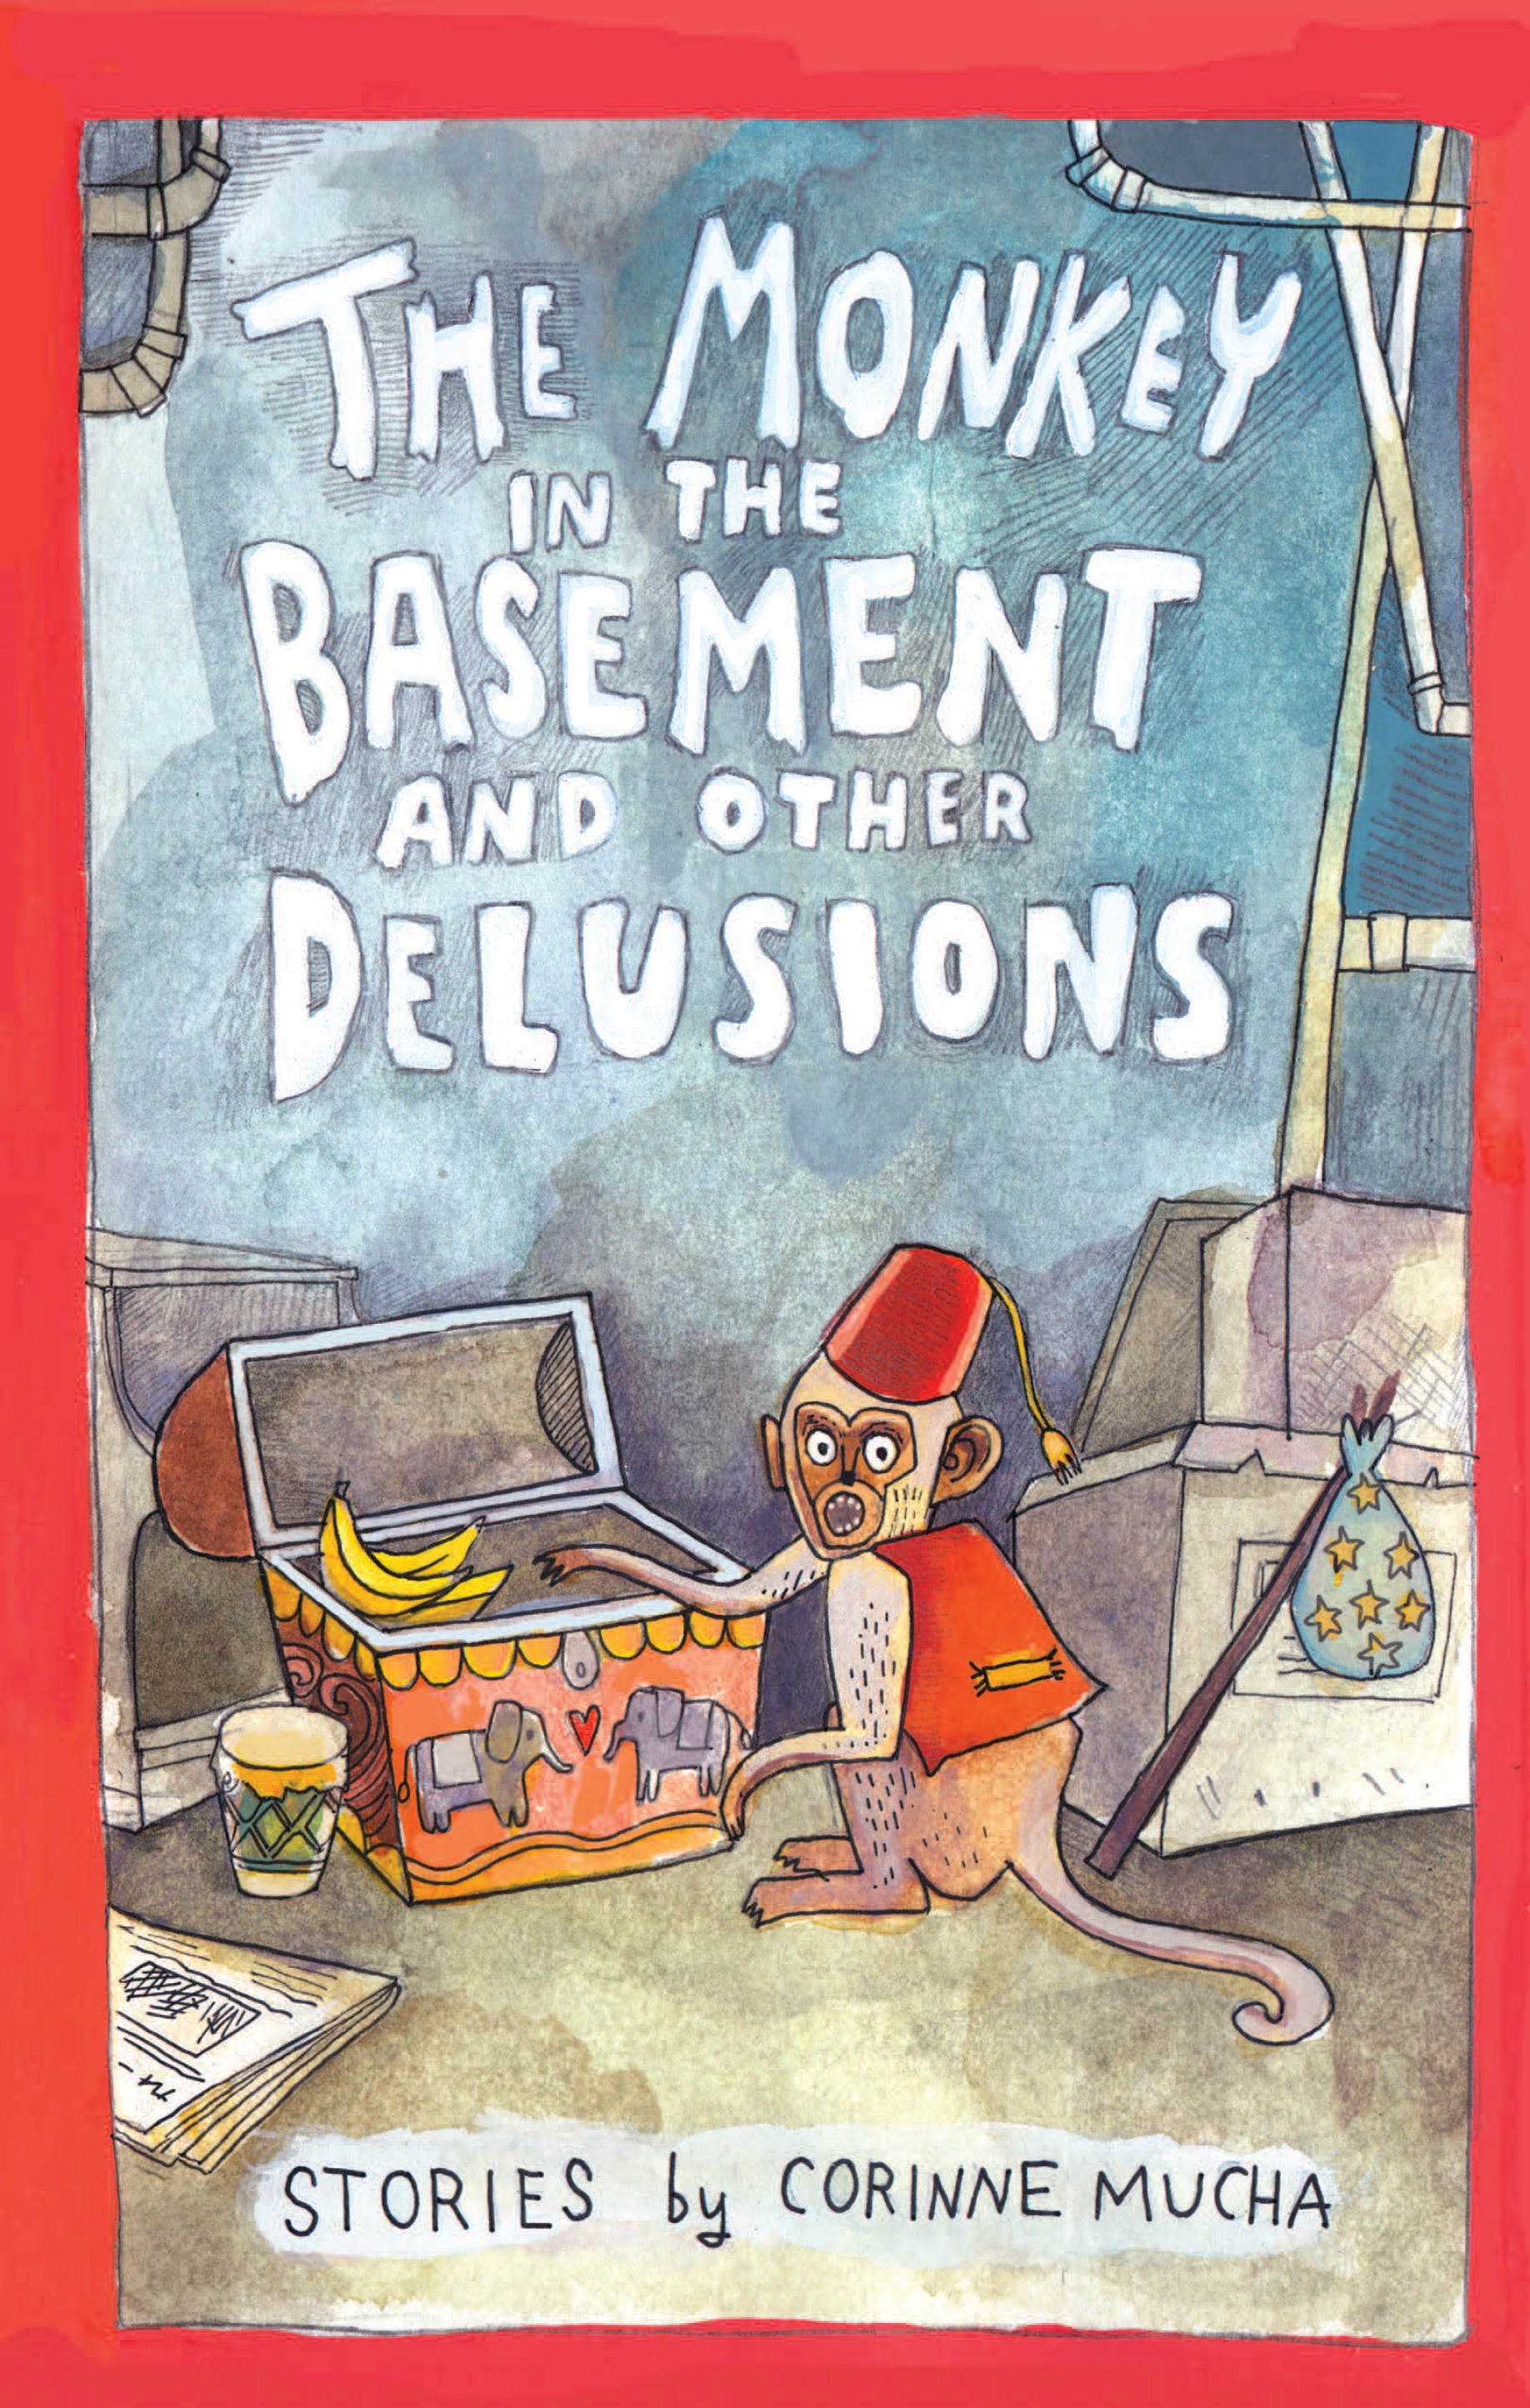 Read online The Monkey in the Basement and Other Delusions comic -  Issue # Full - 1